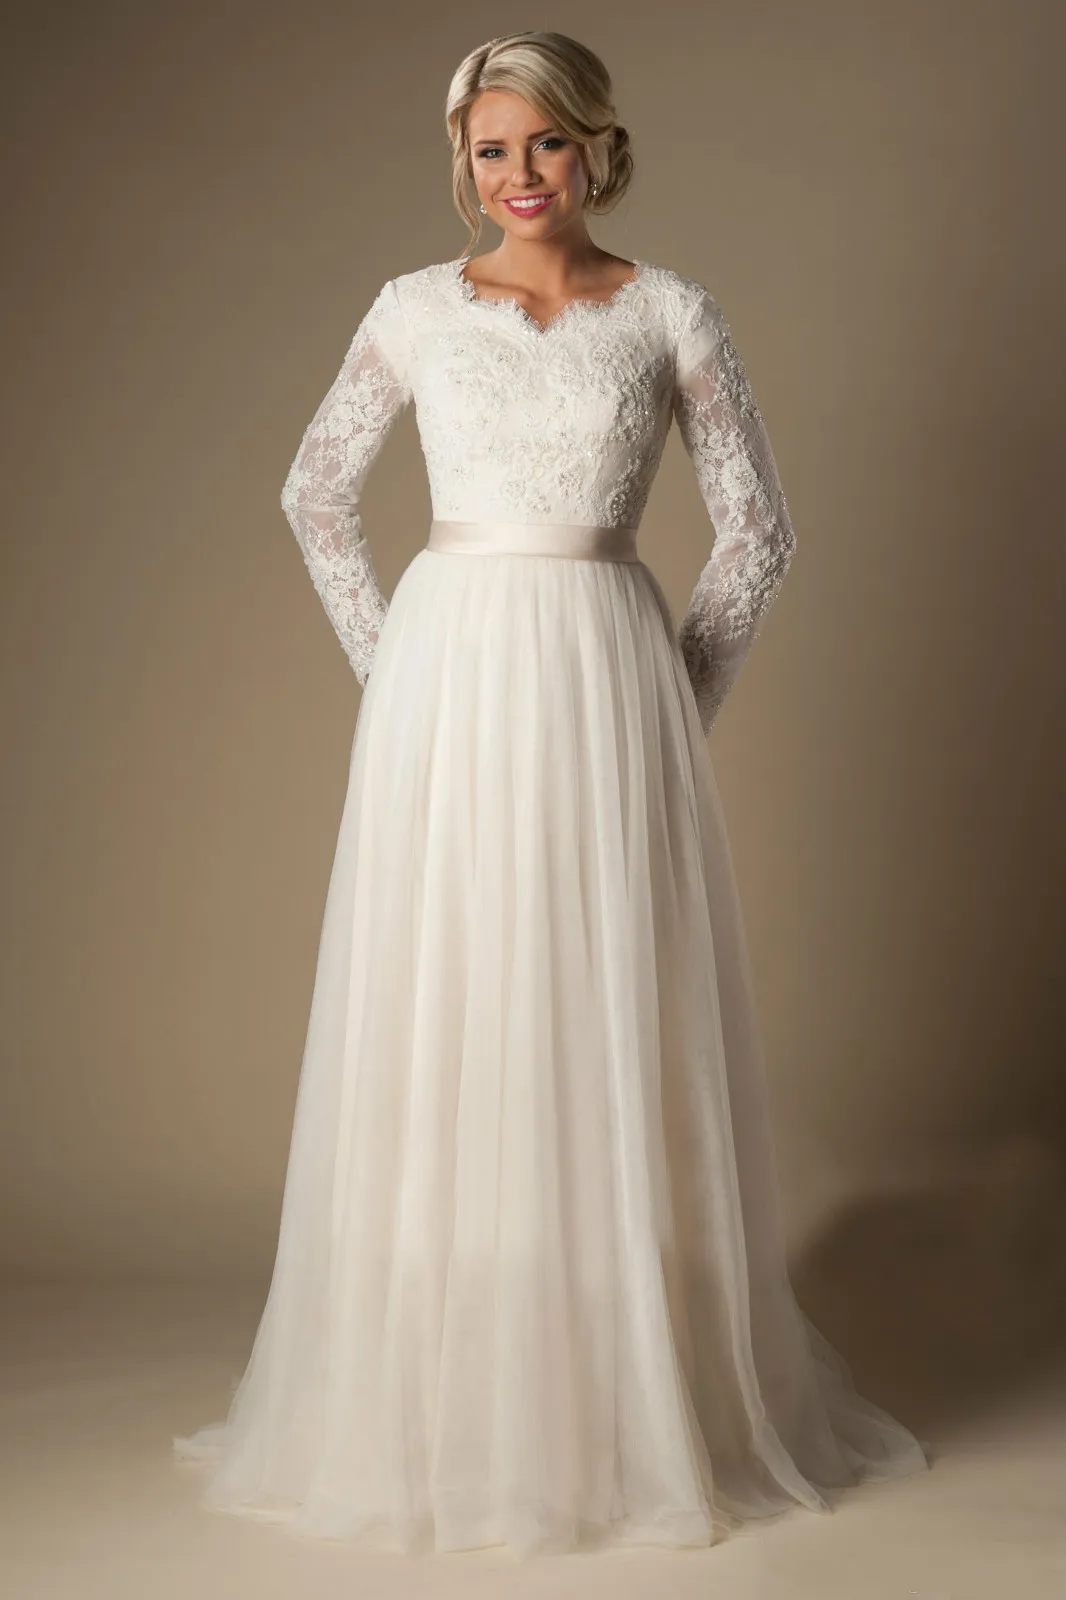 Stunning A-Line Lace Tulle Wedding Dresses Spring Garden Simple Long Sleeves Sheer Sleeves Trains Zip Back Bridal Gown Plus Size Arabic